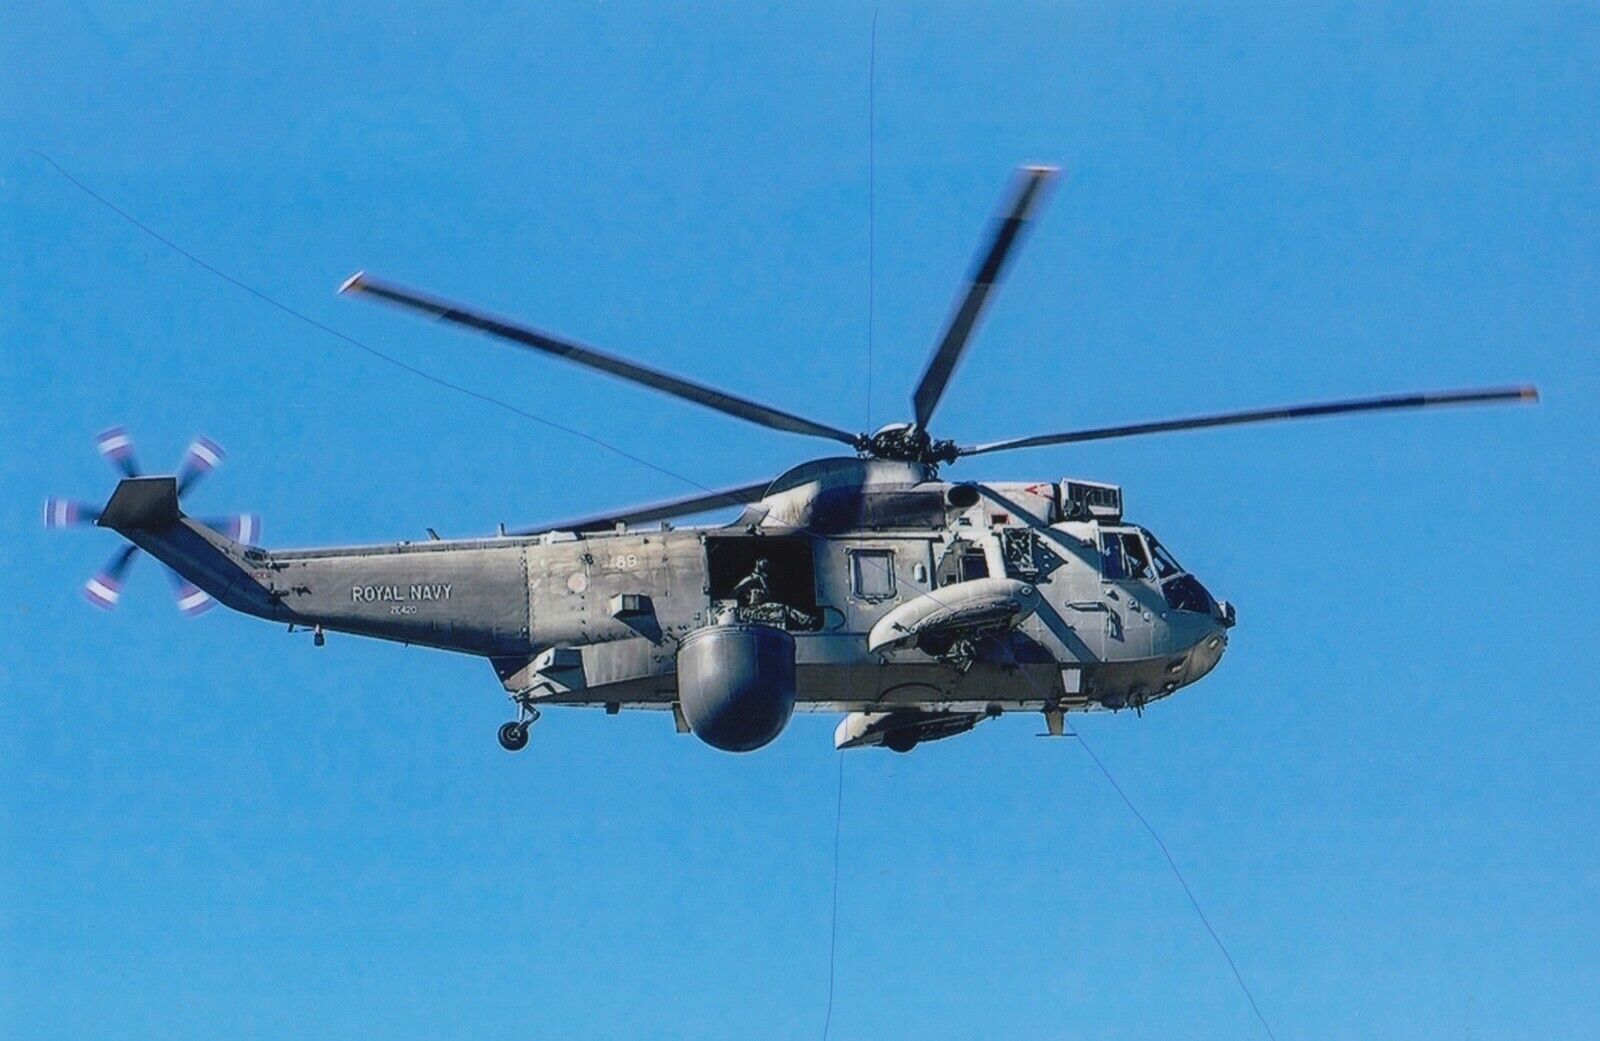  MILITARY AIRCRAFT PLANE PHOTO ROYAL NAVY PHOTOGRAPH SEA KING PICTURE HELICOPTER